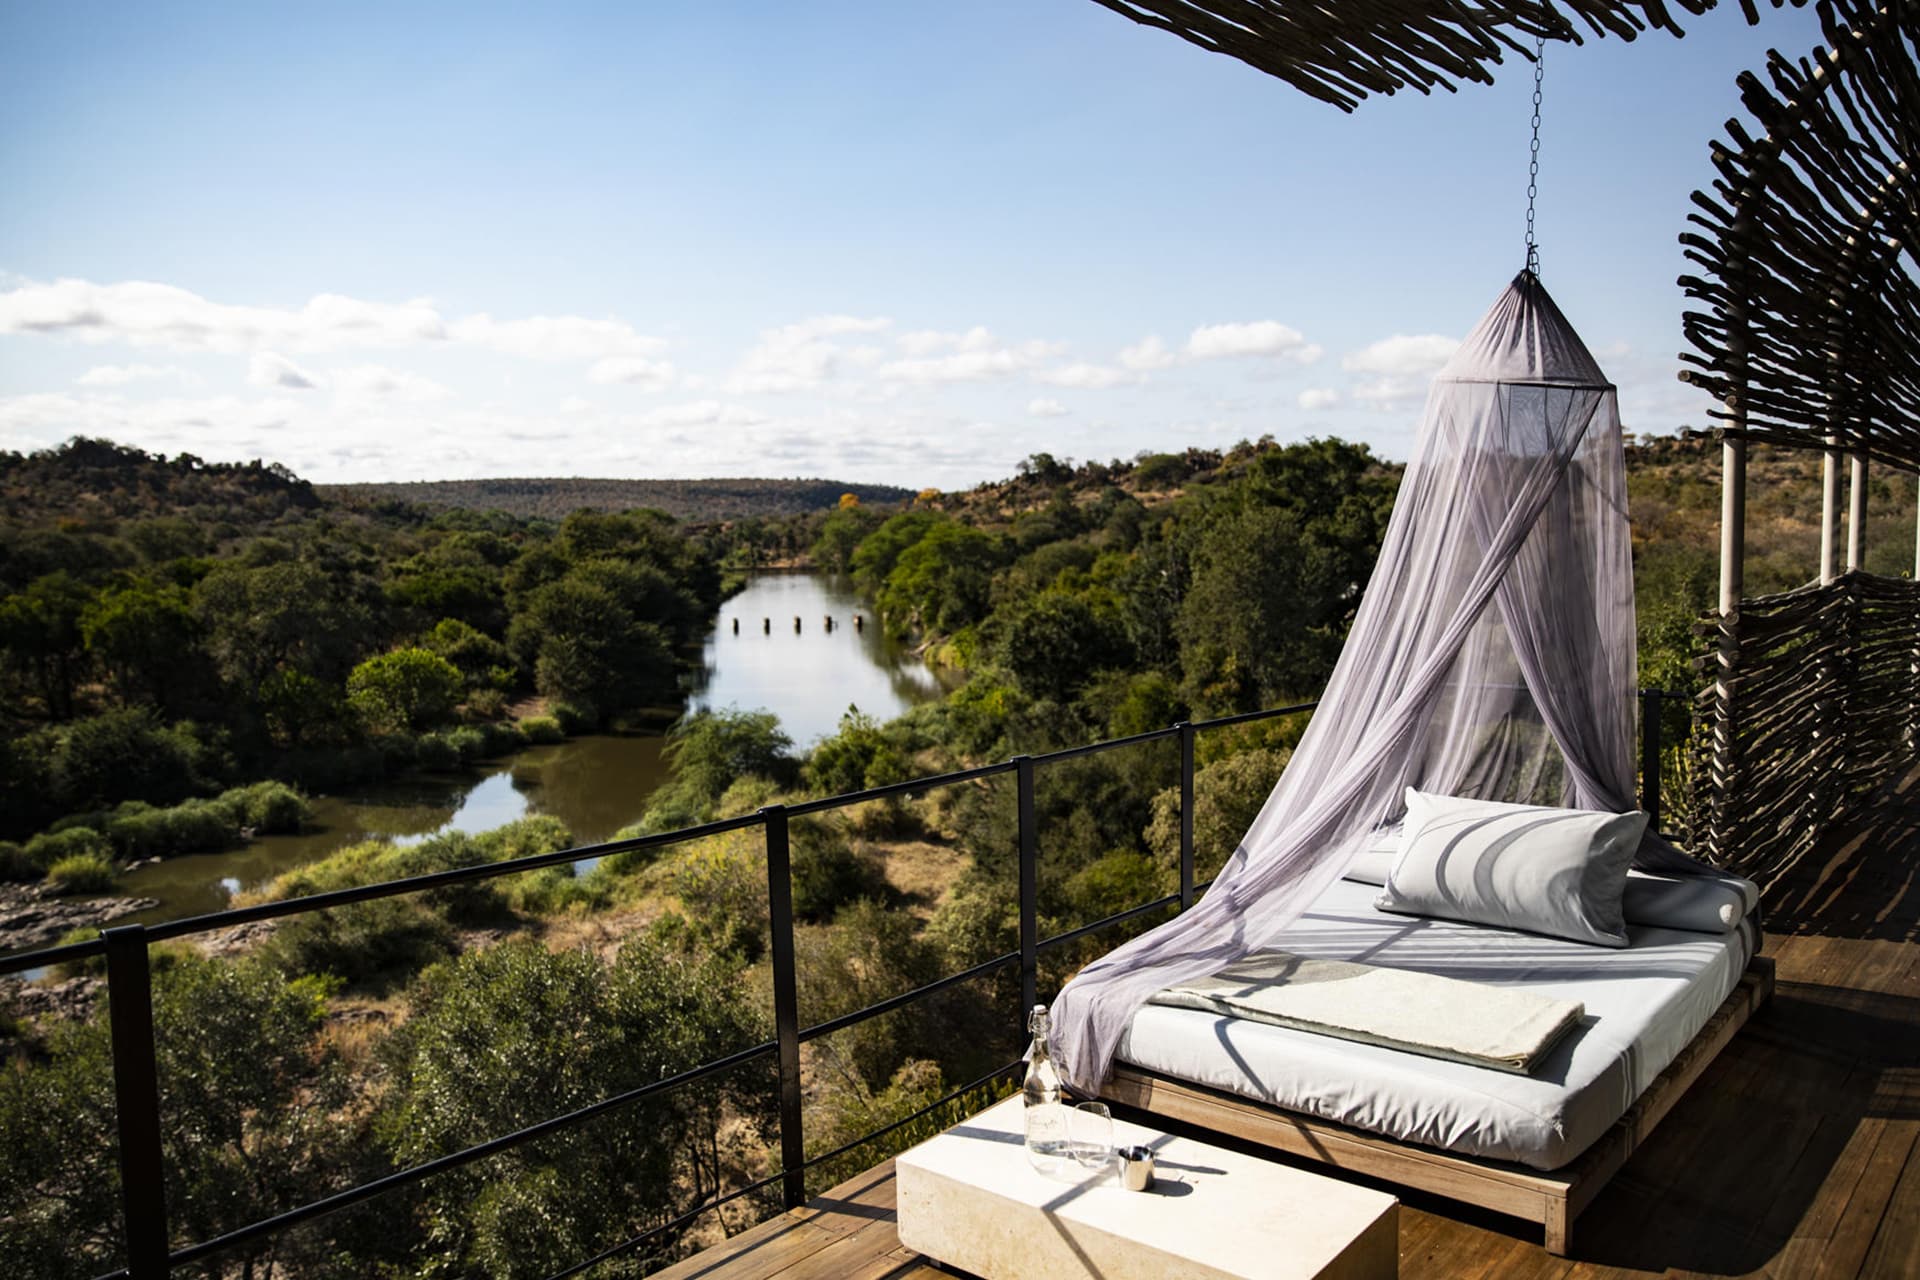 A bed on a viewing deck at Singita Lebombo – a recommended destination for honeymoons in Africa.